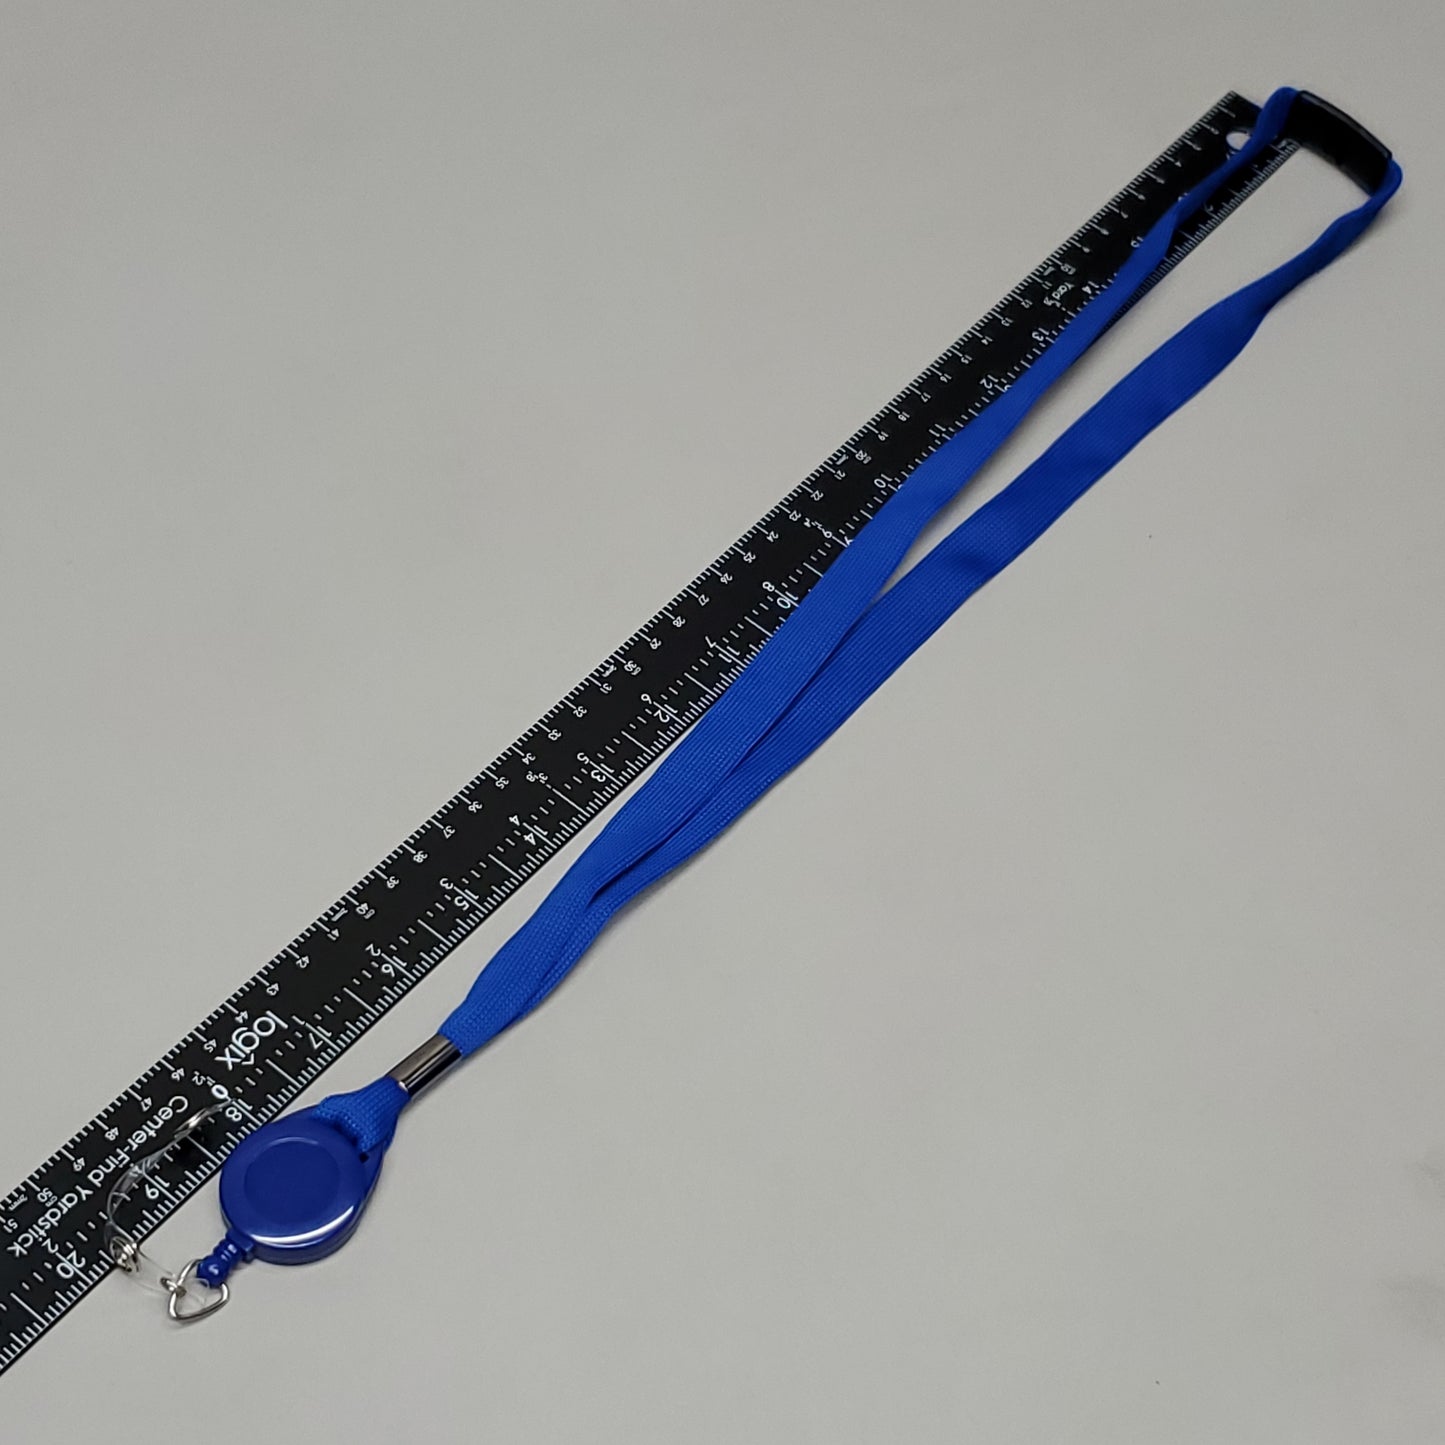 Blue Lanyards With Lanyard Reel & ID Card Holder Neck Strap 25 Pack Y493075 (New)